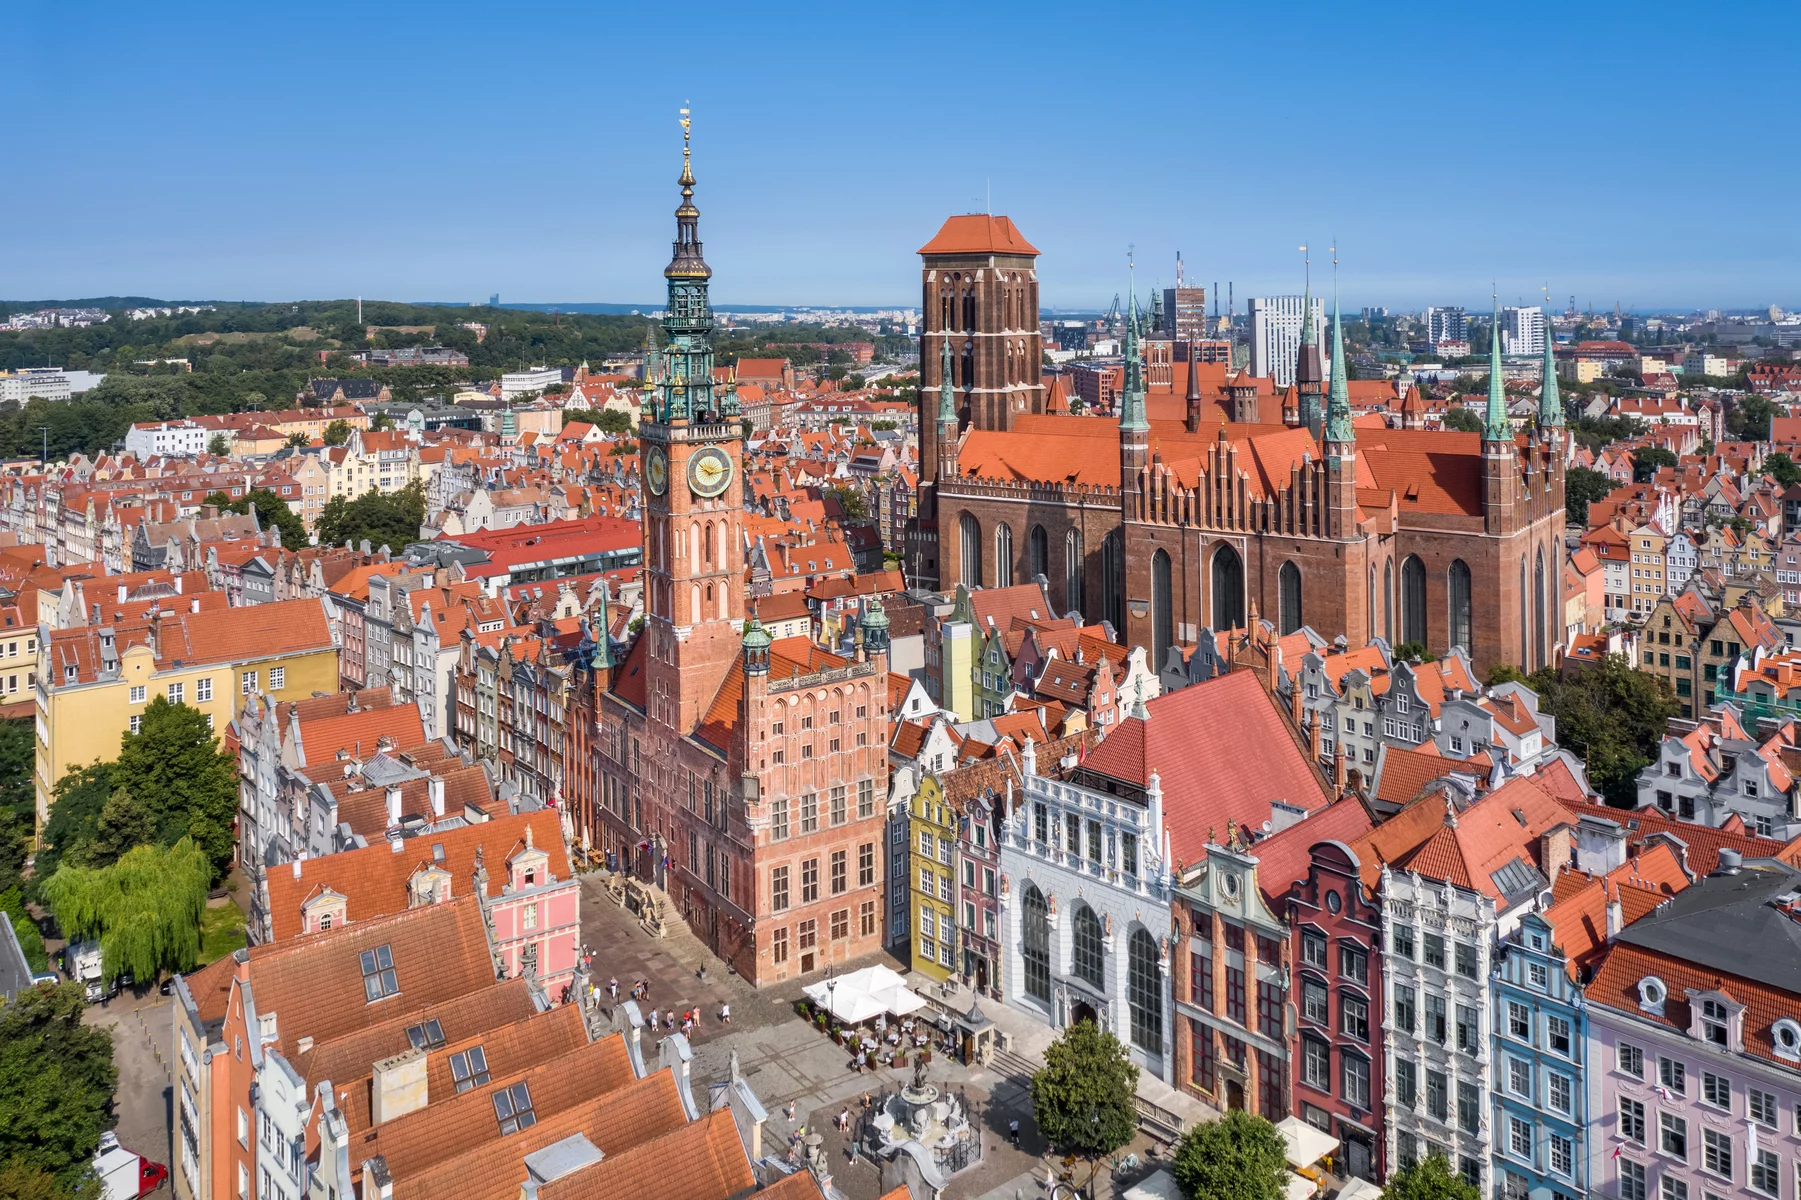 Aerial view of Gdansk, Poland